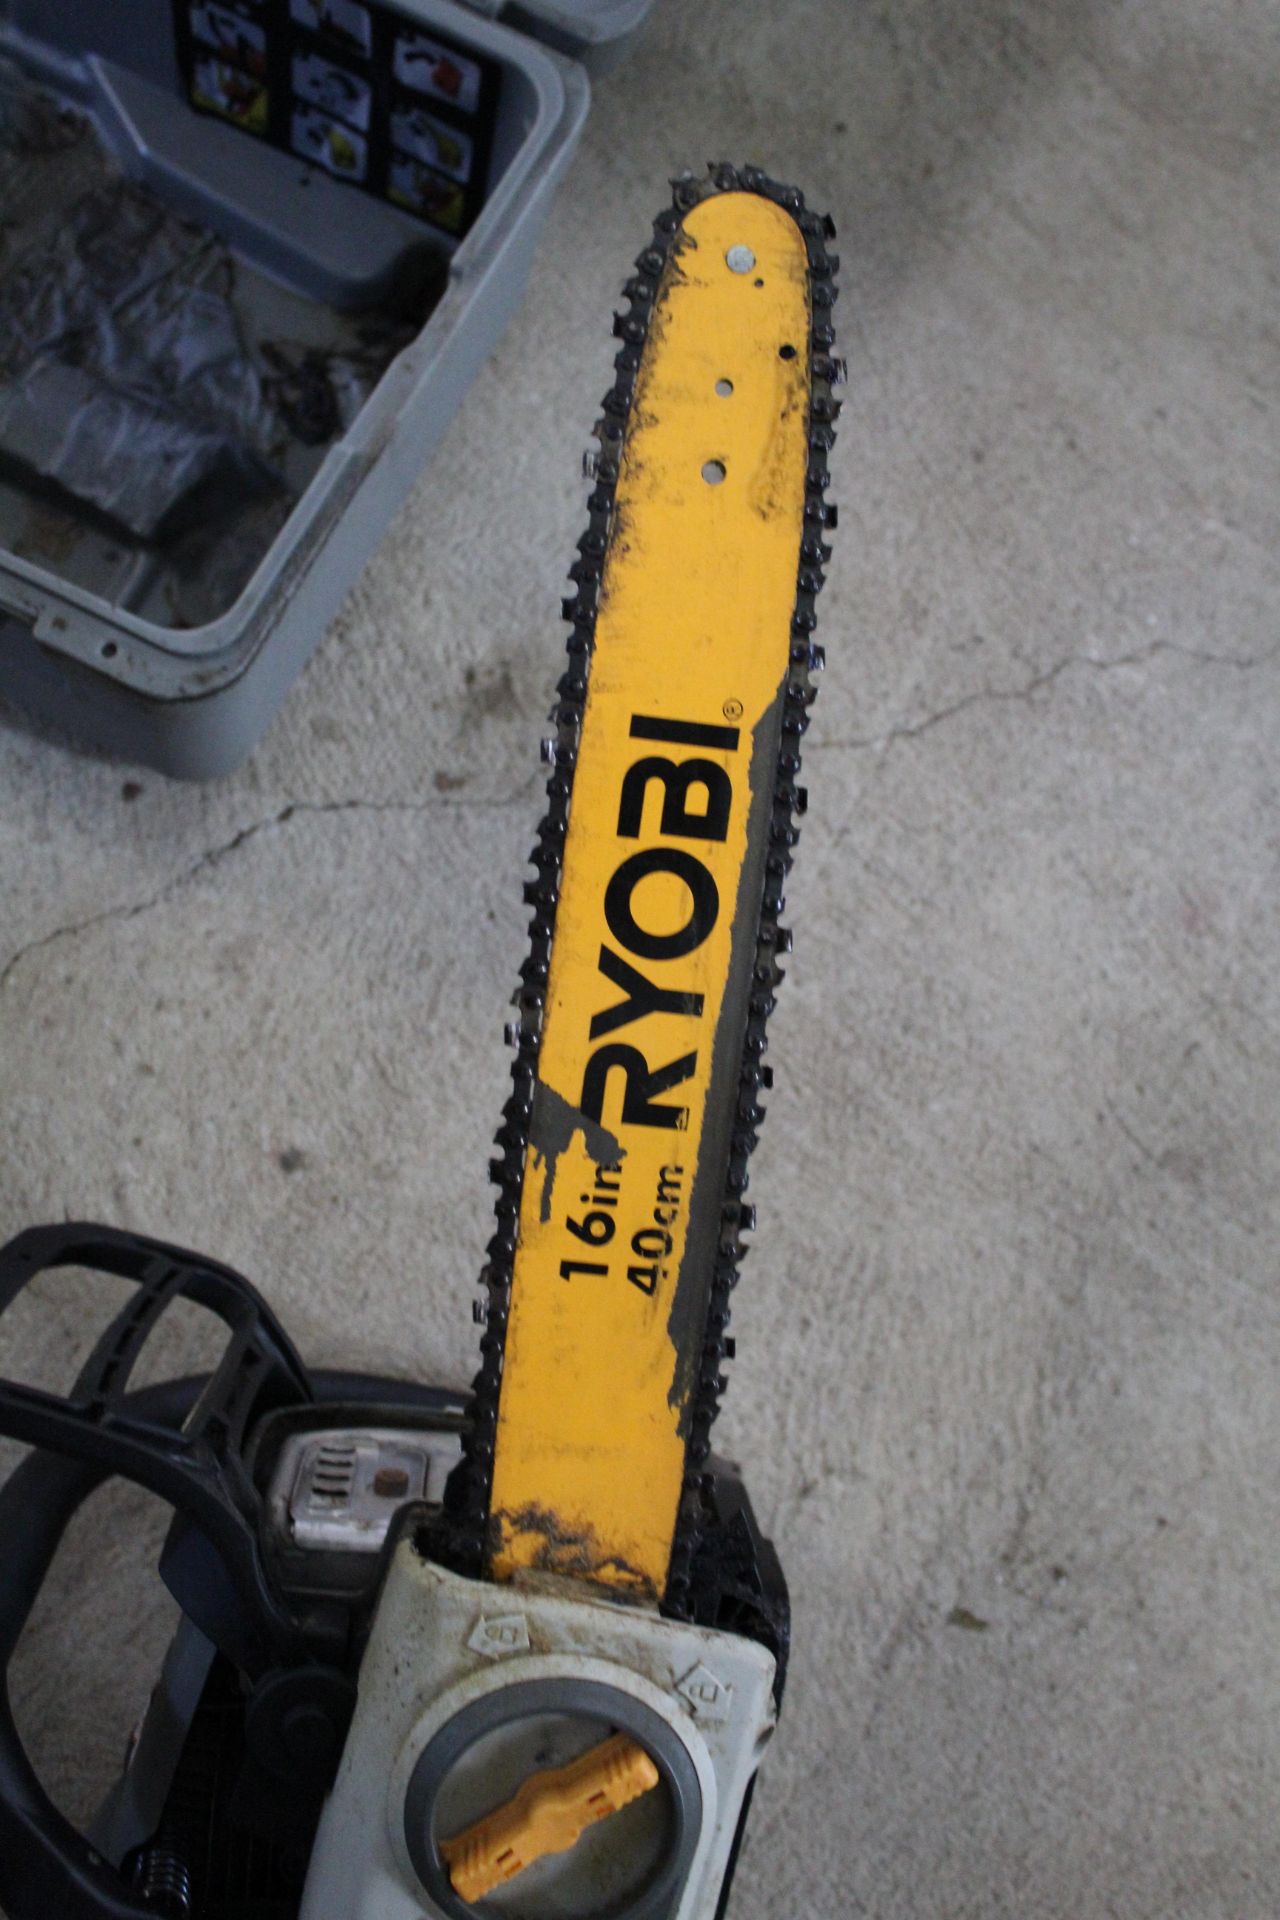 Ryobi petrol chainsaw and case. - Image 5 of 6